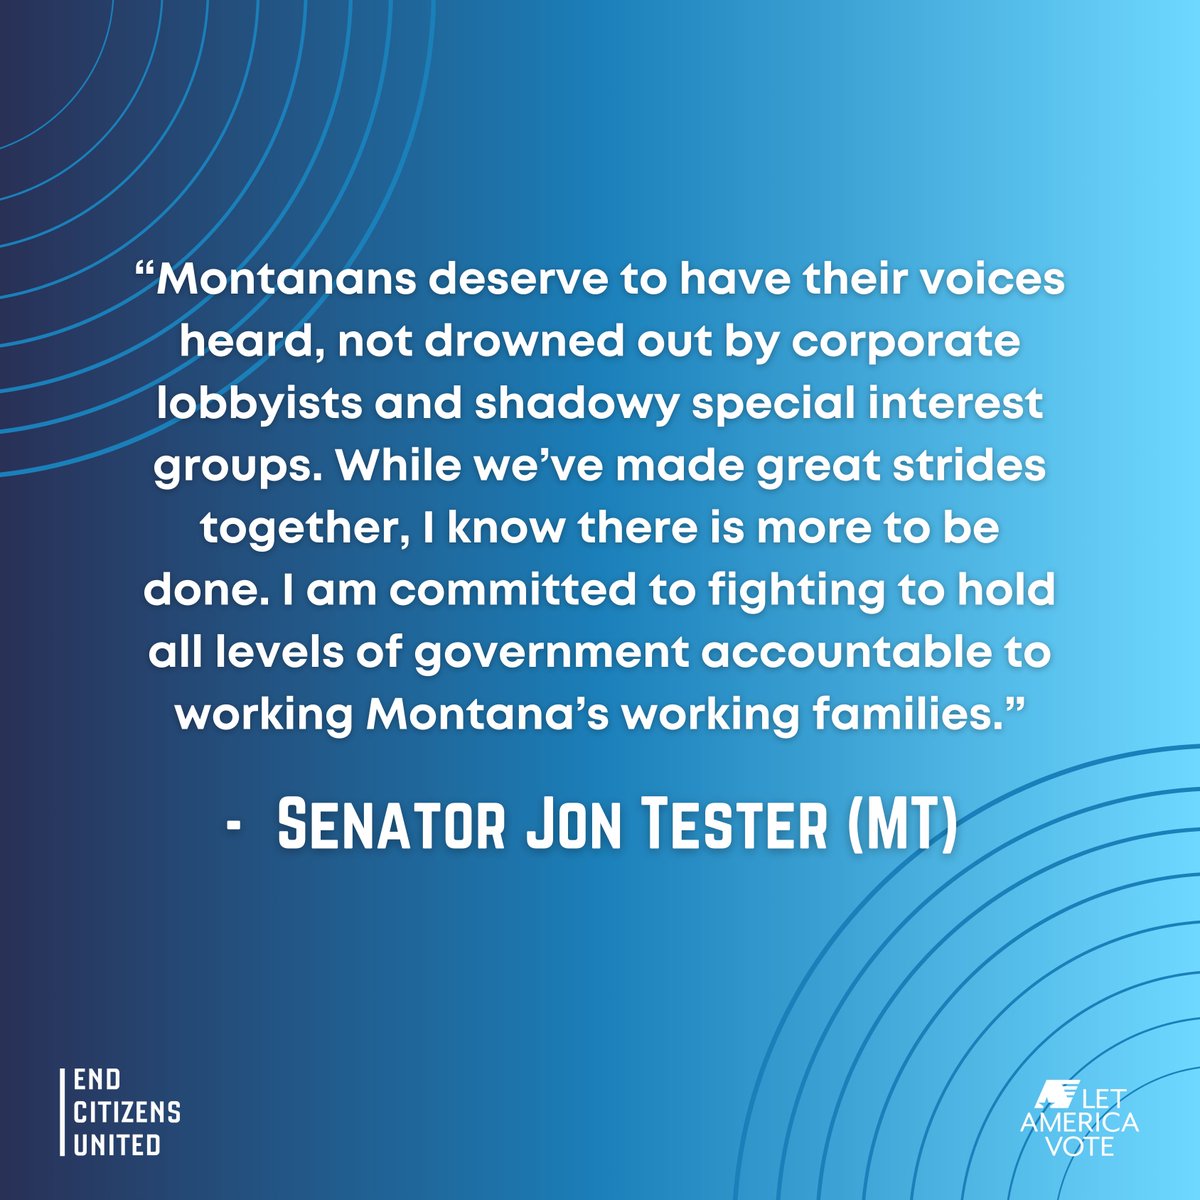 At a time when dark money and corruption runs rampant in politics, @SenatorTester has been a trailblazer in his continued fight to make our government more transparent and accountable for working families. We’re proud to present him with our inaugural Ethics and Transparency…